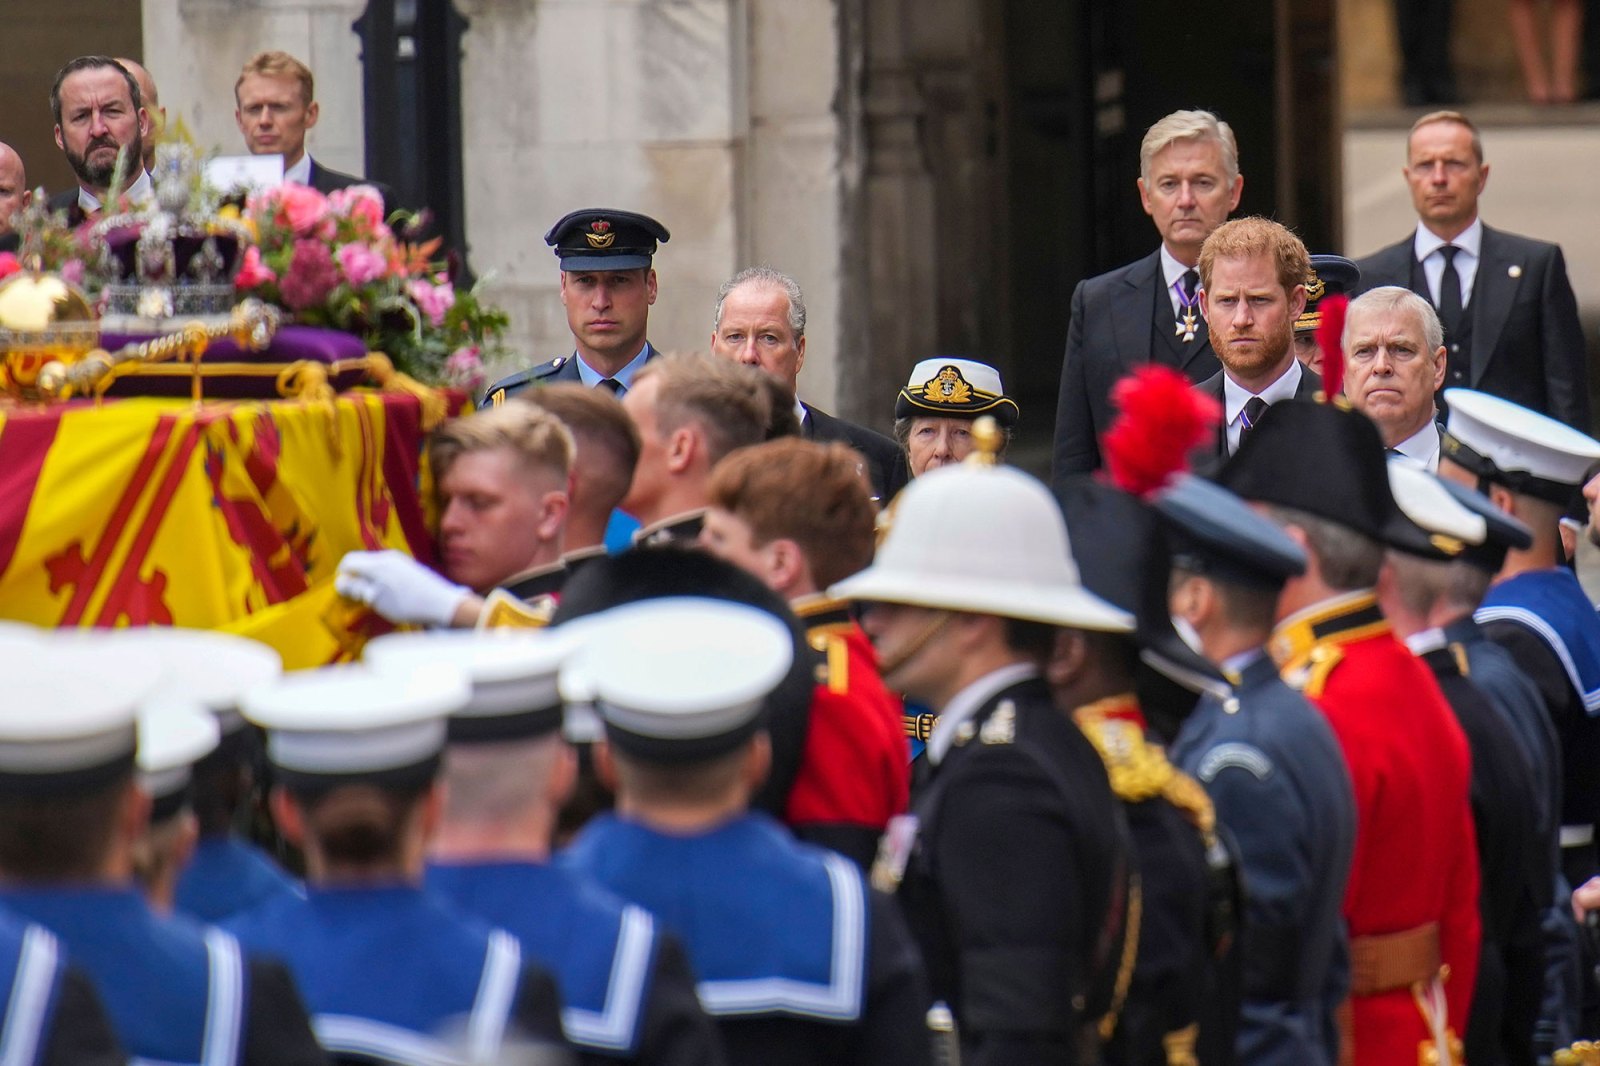 Prince Harry Does Not Wear Military Uniform to Queen Elizabeth II's Funeral Despite Decade of Service 3